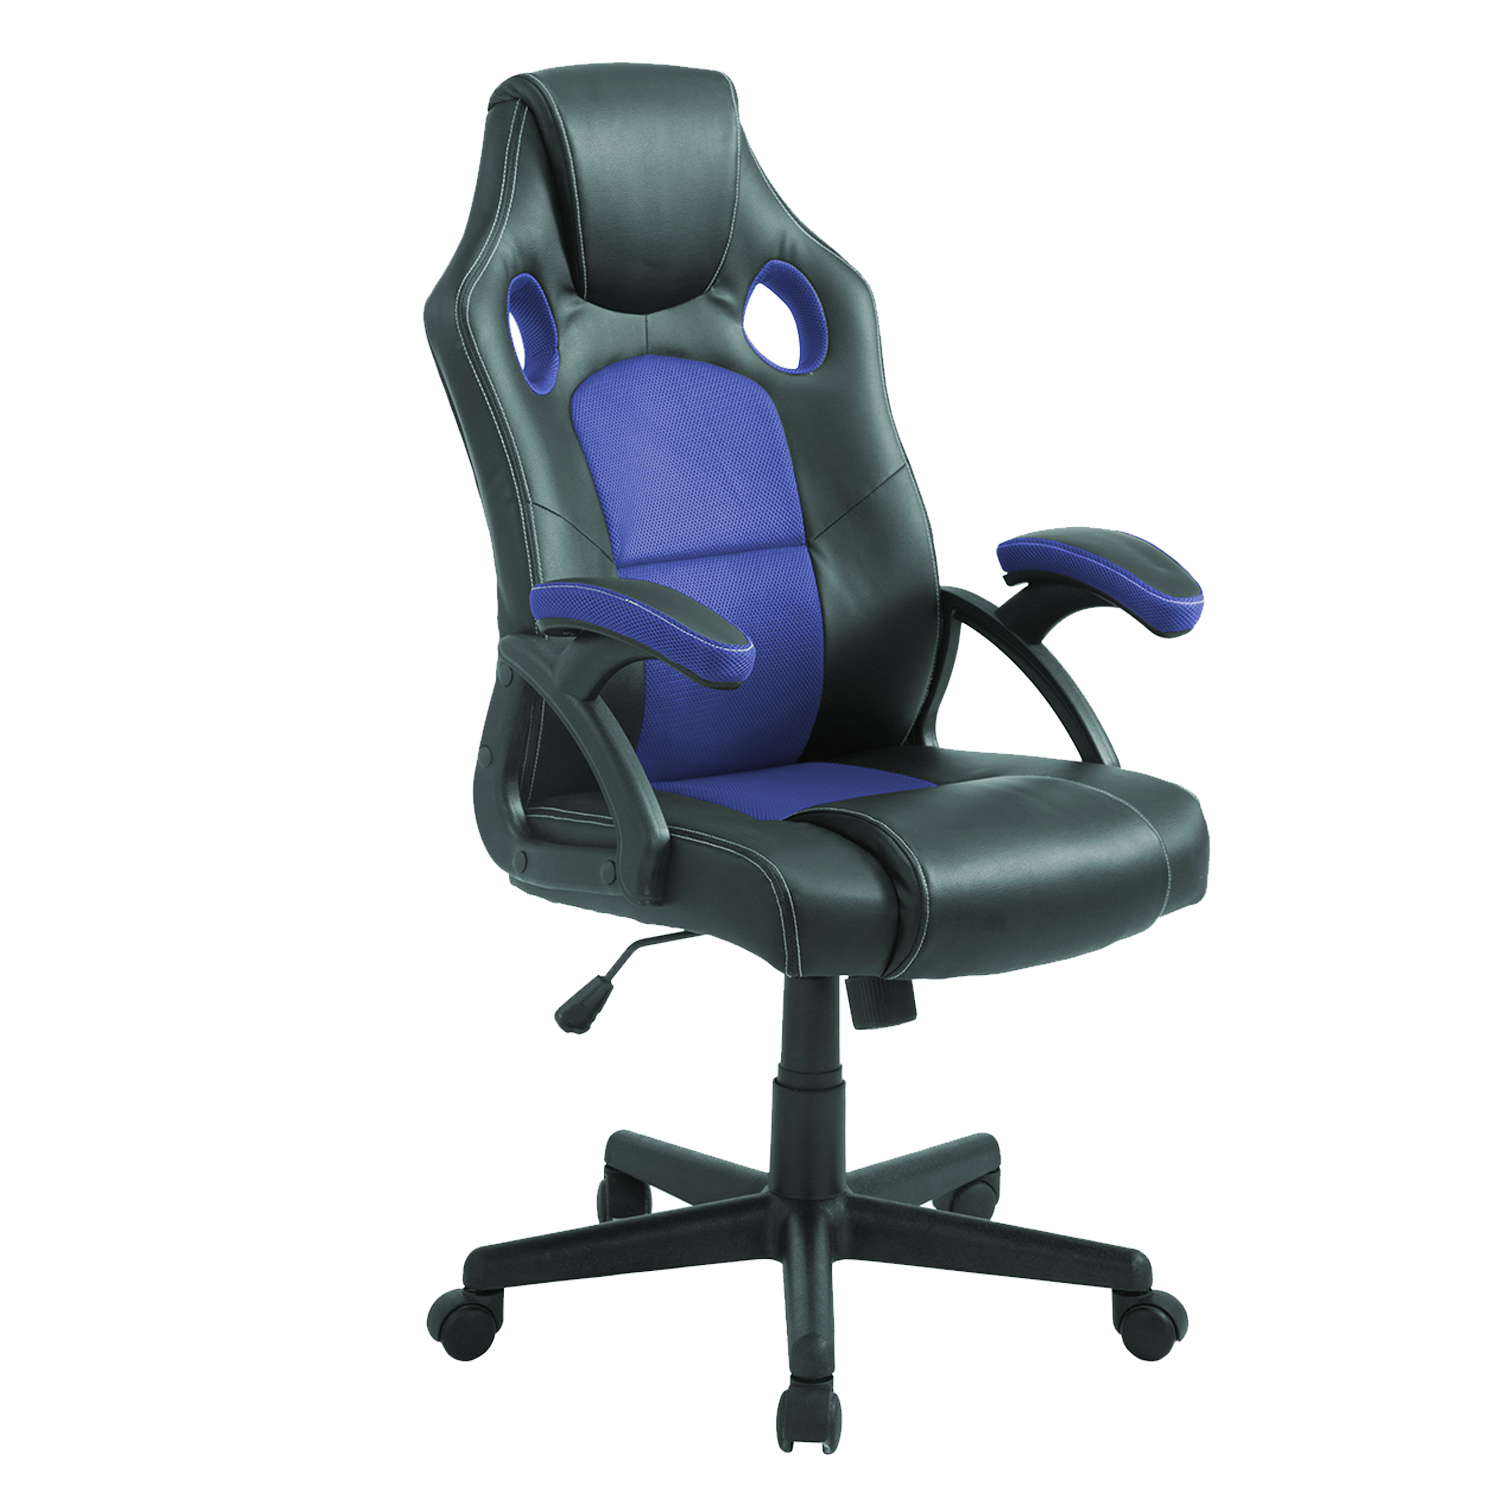 Blue Gaming Chair - Daniel James Products